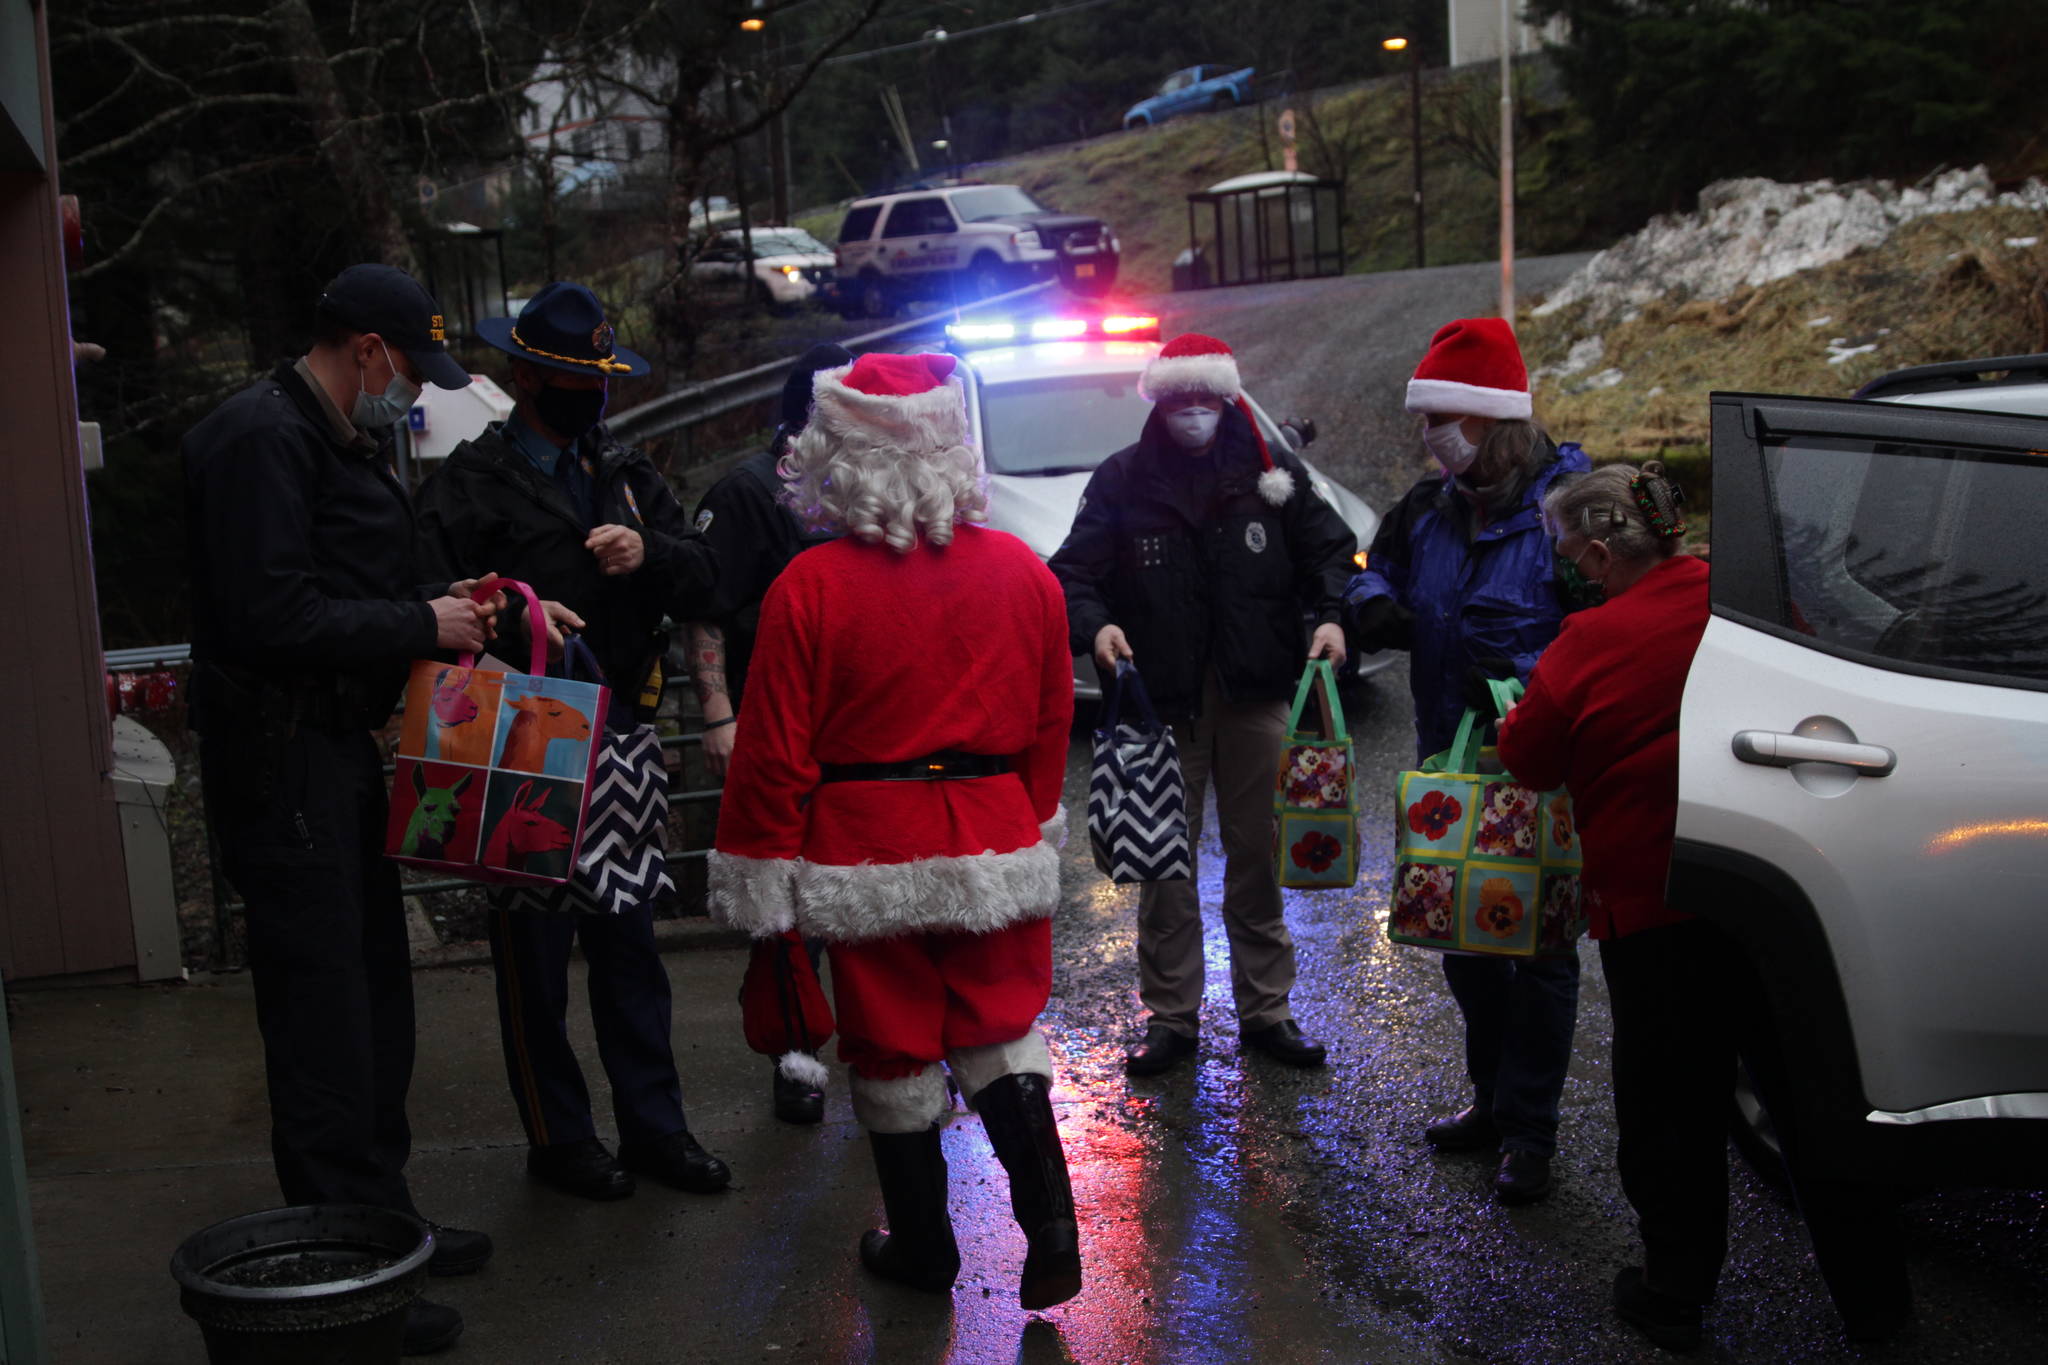 Law enforcement officers and volunteers deliver presents to families at the AWARE shelter on Dec. 23, 2020 as part of the Alaska Police Officer’s Association annual “Shop with a Cop” event. (Michael S. Lockett / Juneau Empire)